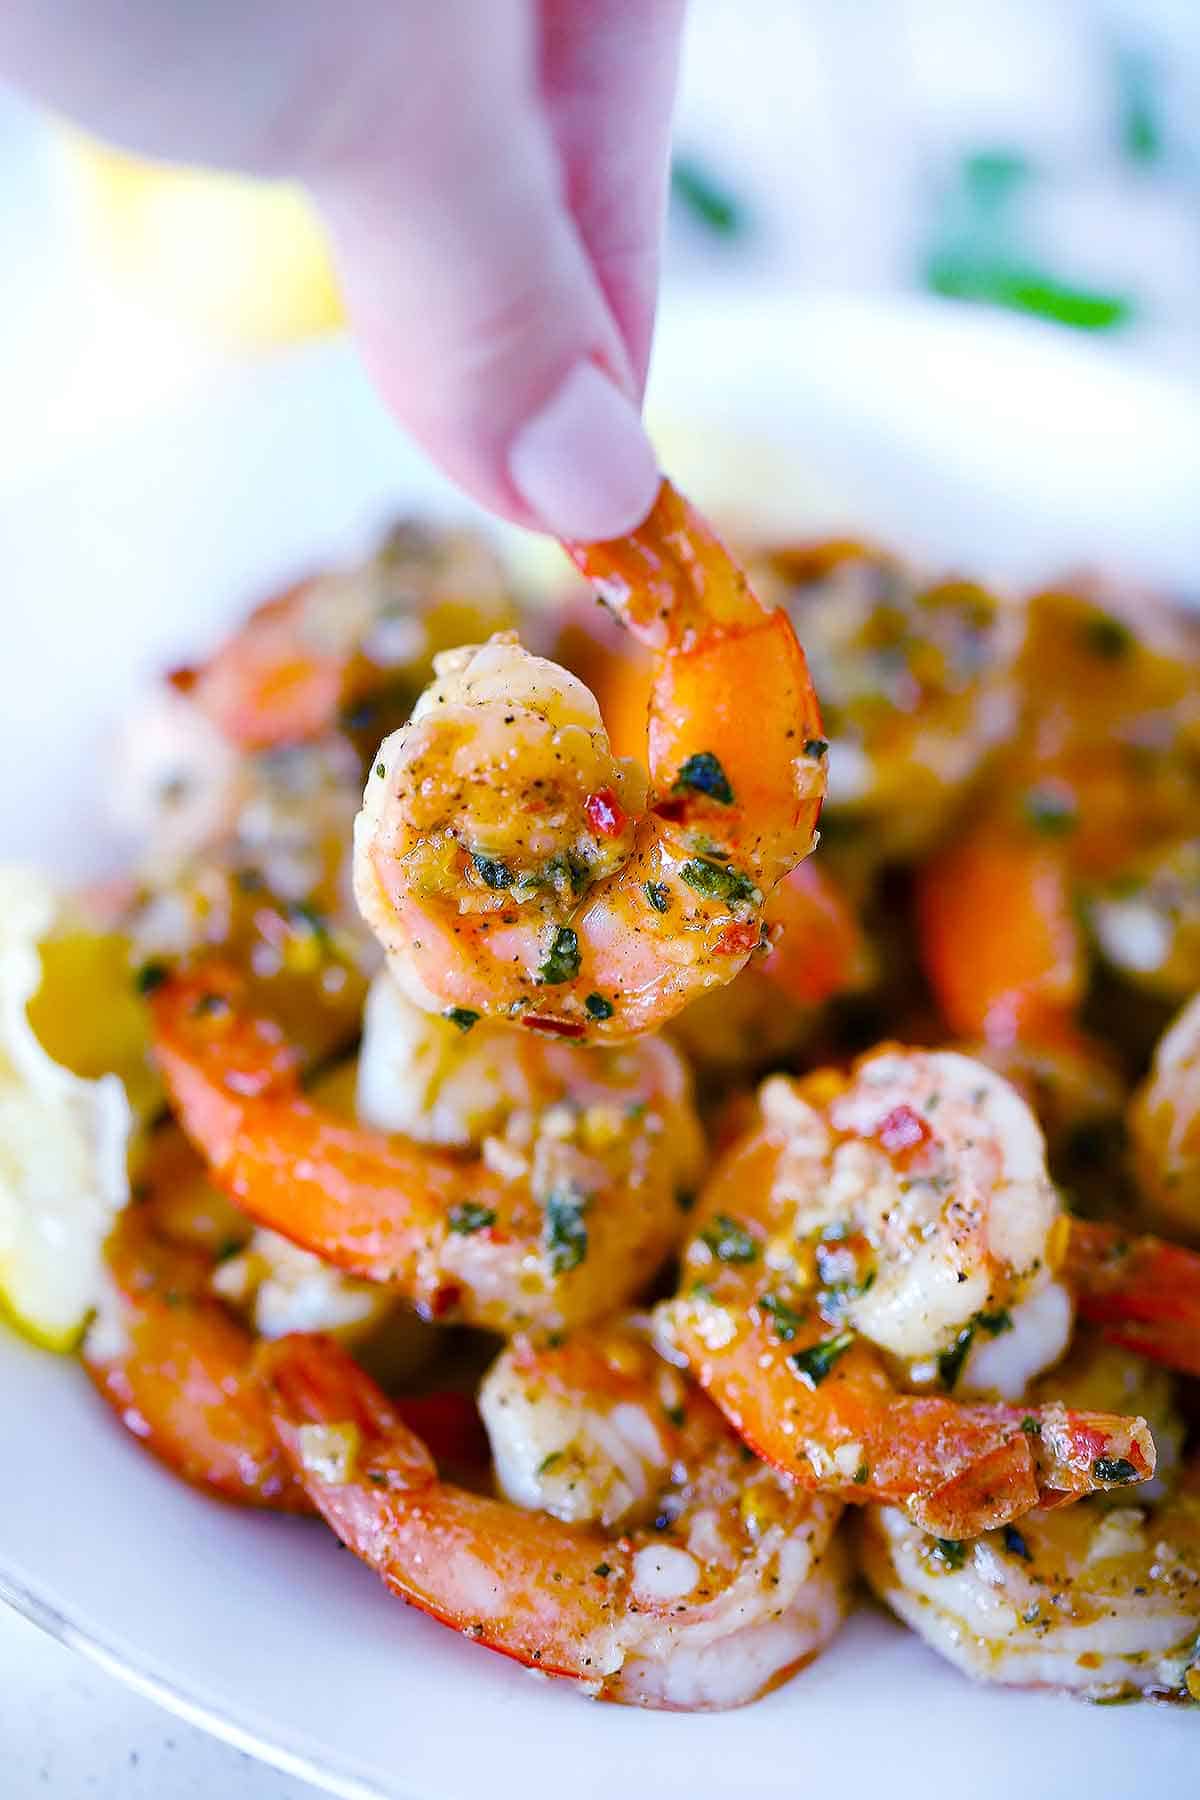 A hand holding a piece of sauteed shrimp by the tail.